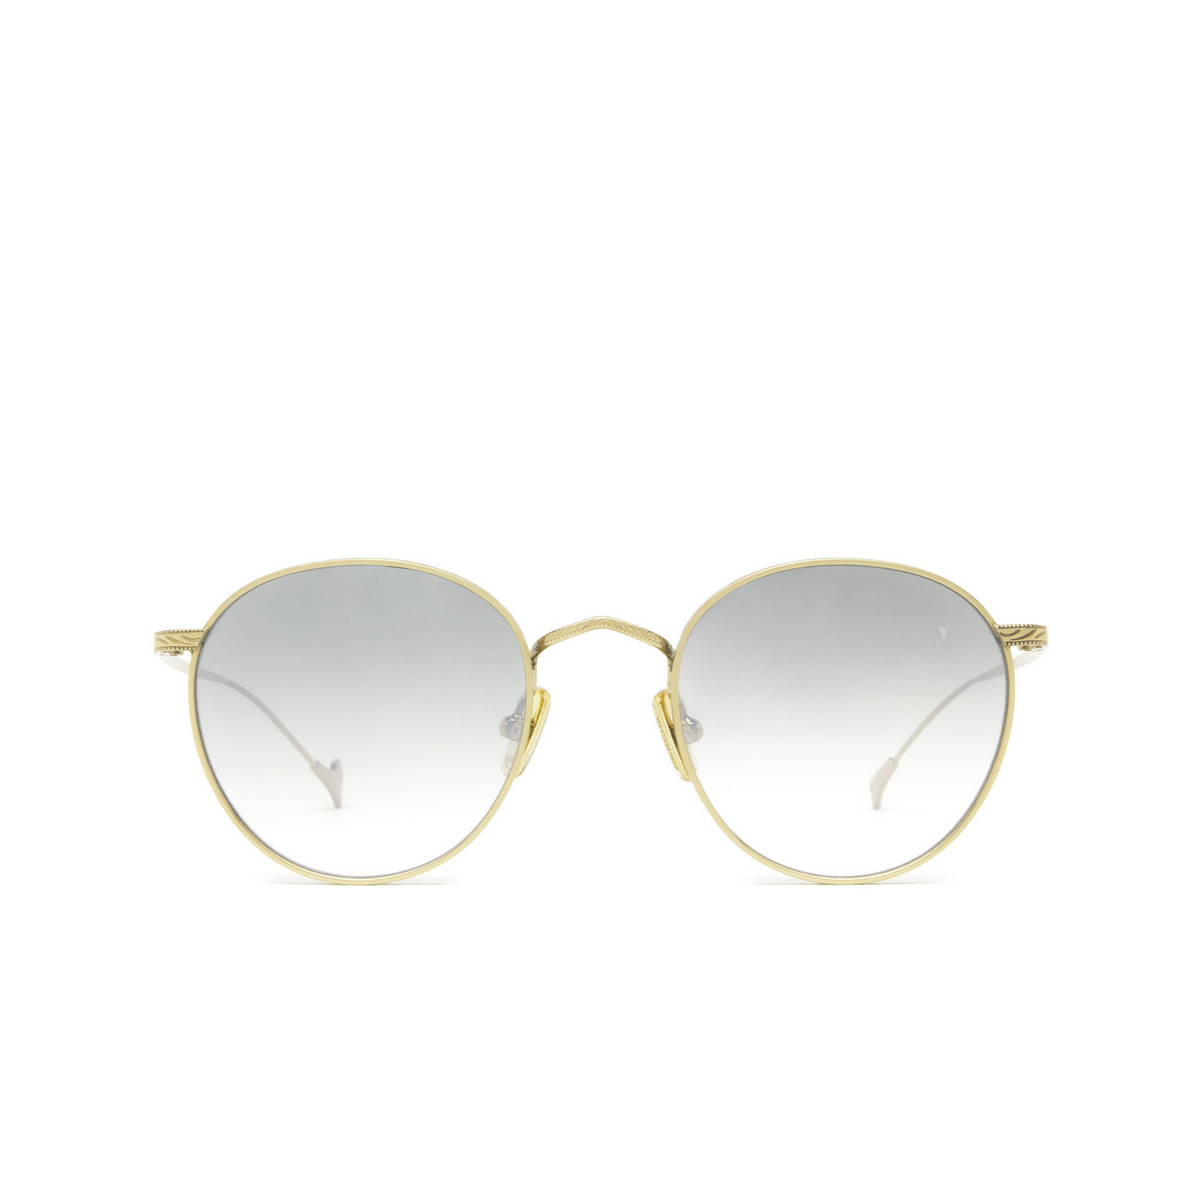 Eyepetizer® Round Sunglasses: Jockey color Gold C.4-25F - front view.